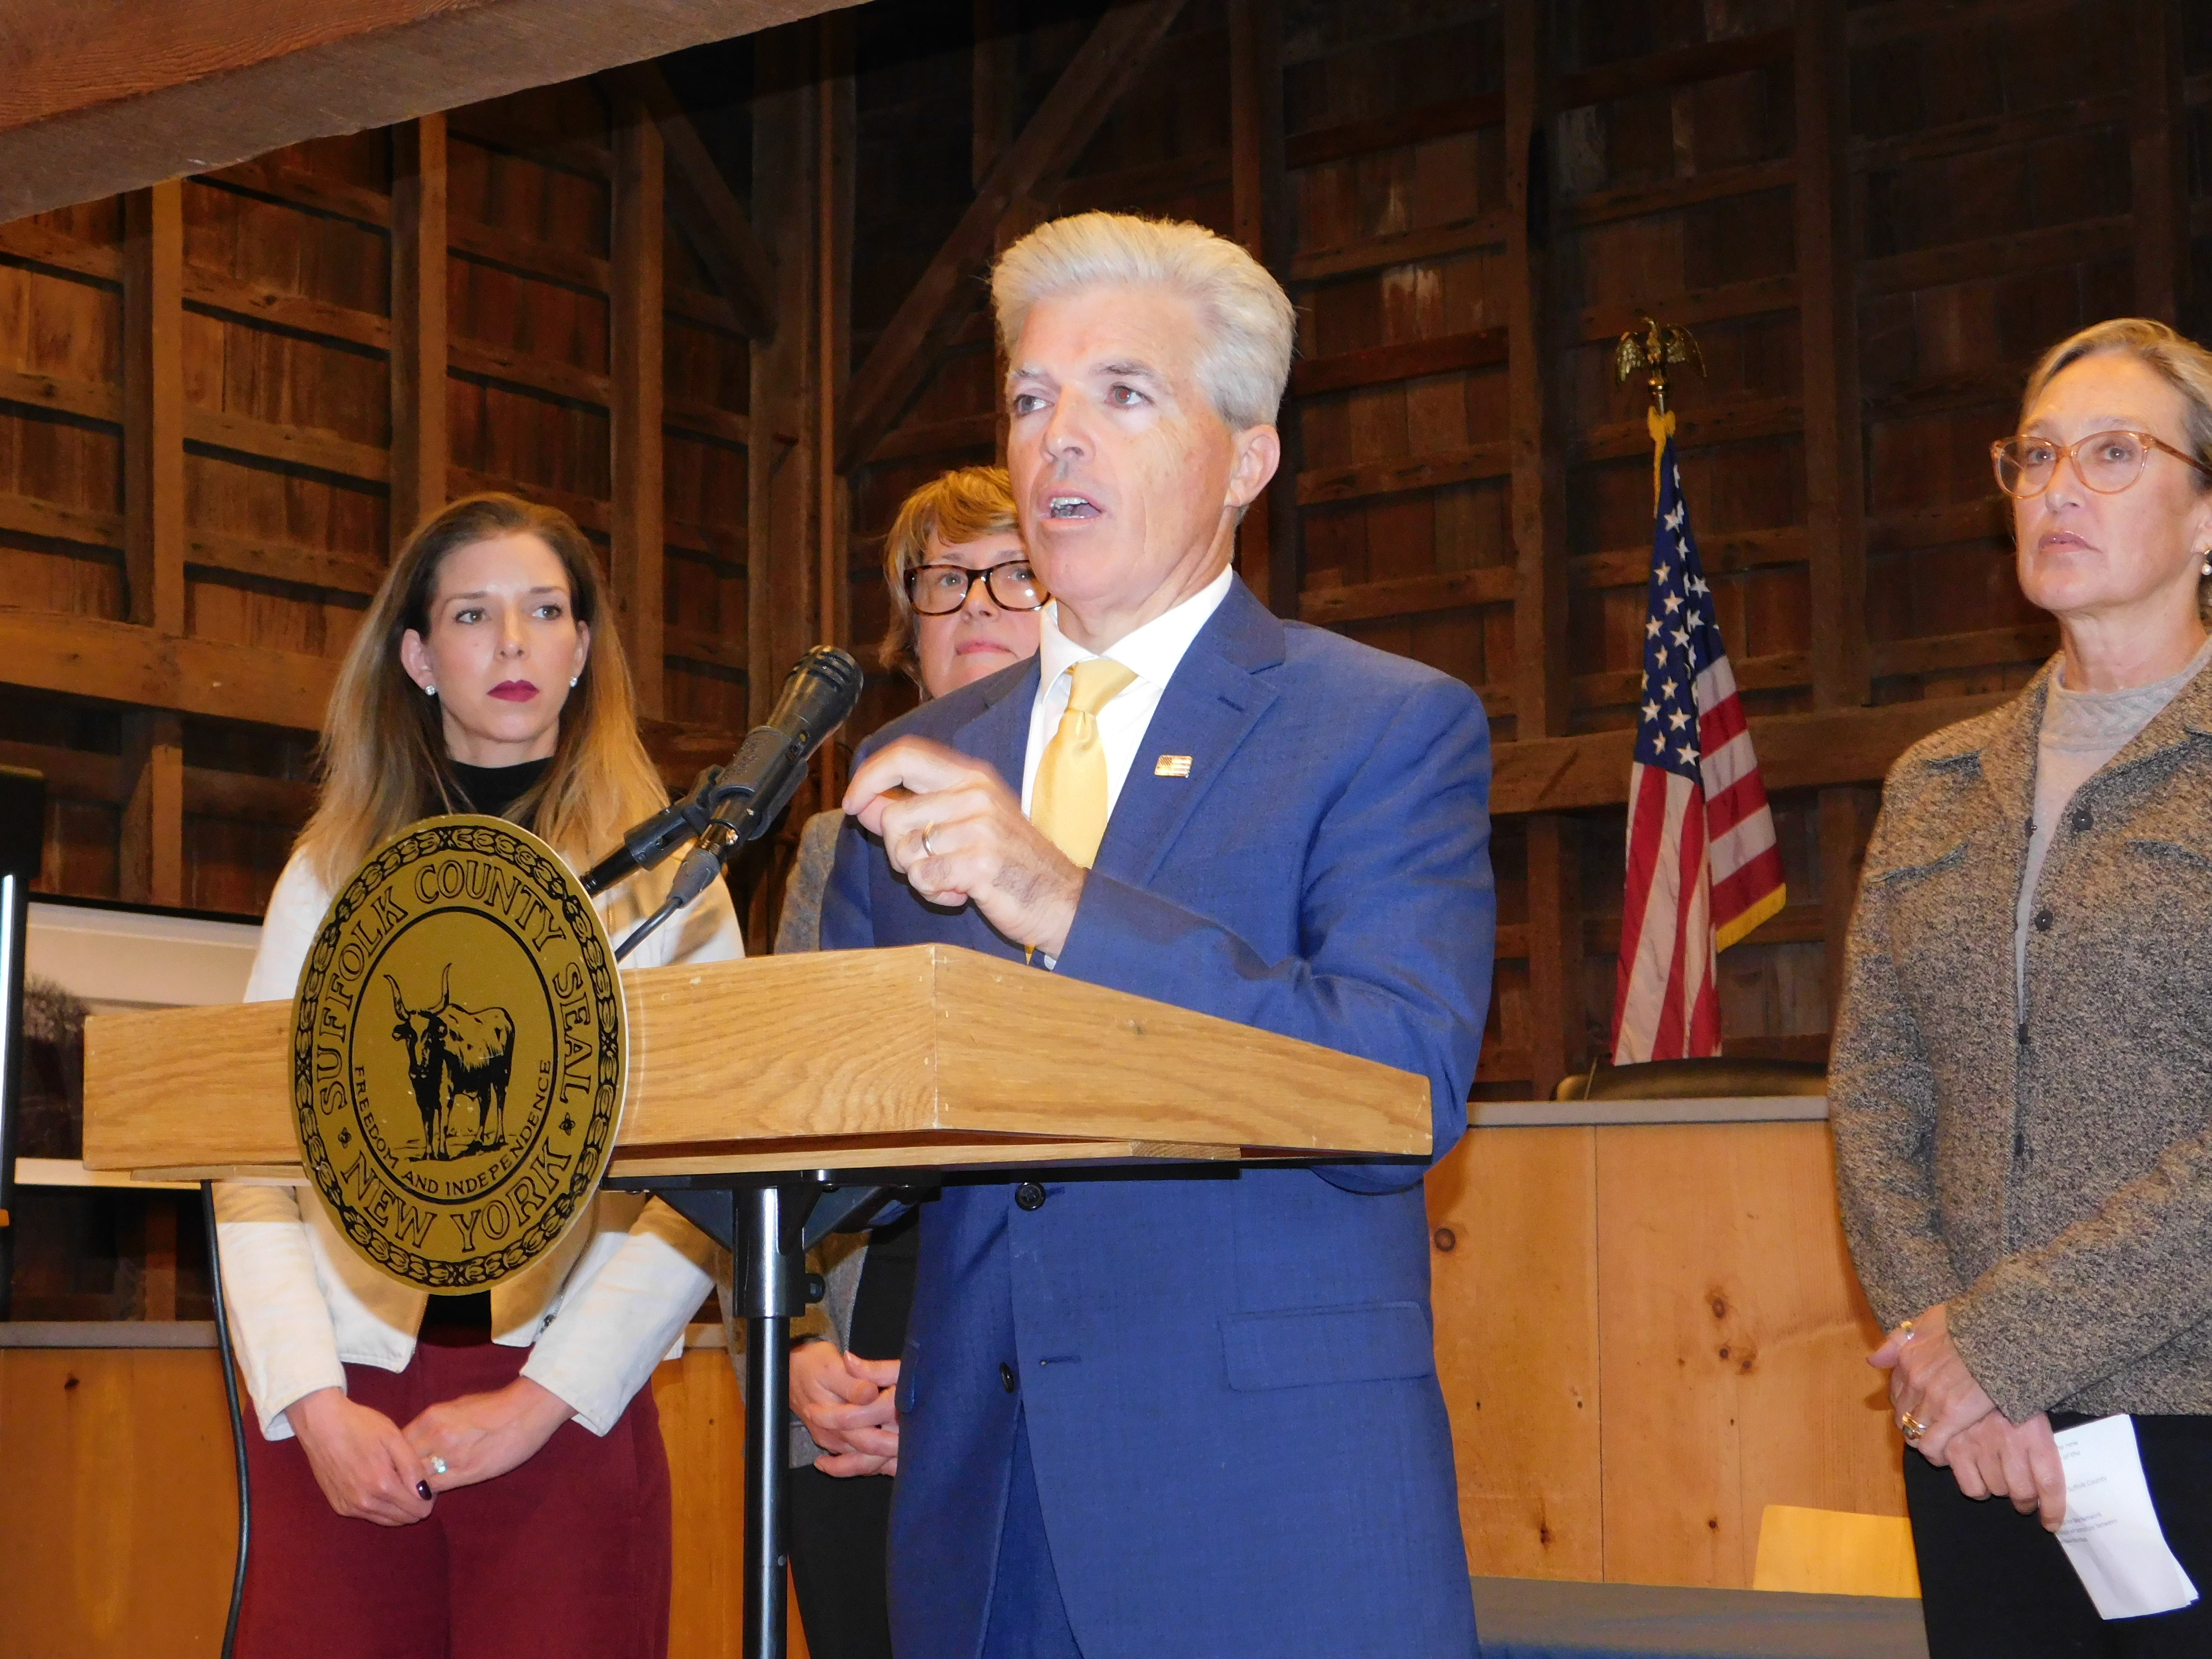 $400,000 was awarded from the Suffolk County JumpStart program by Suffolk County Executive Steve Bellone at East Hampton Town Hall on Friday, October 11.   ELIZABETH VESPE